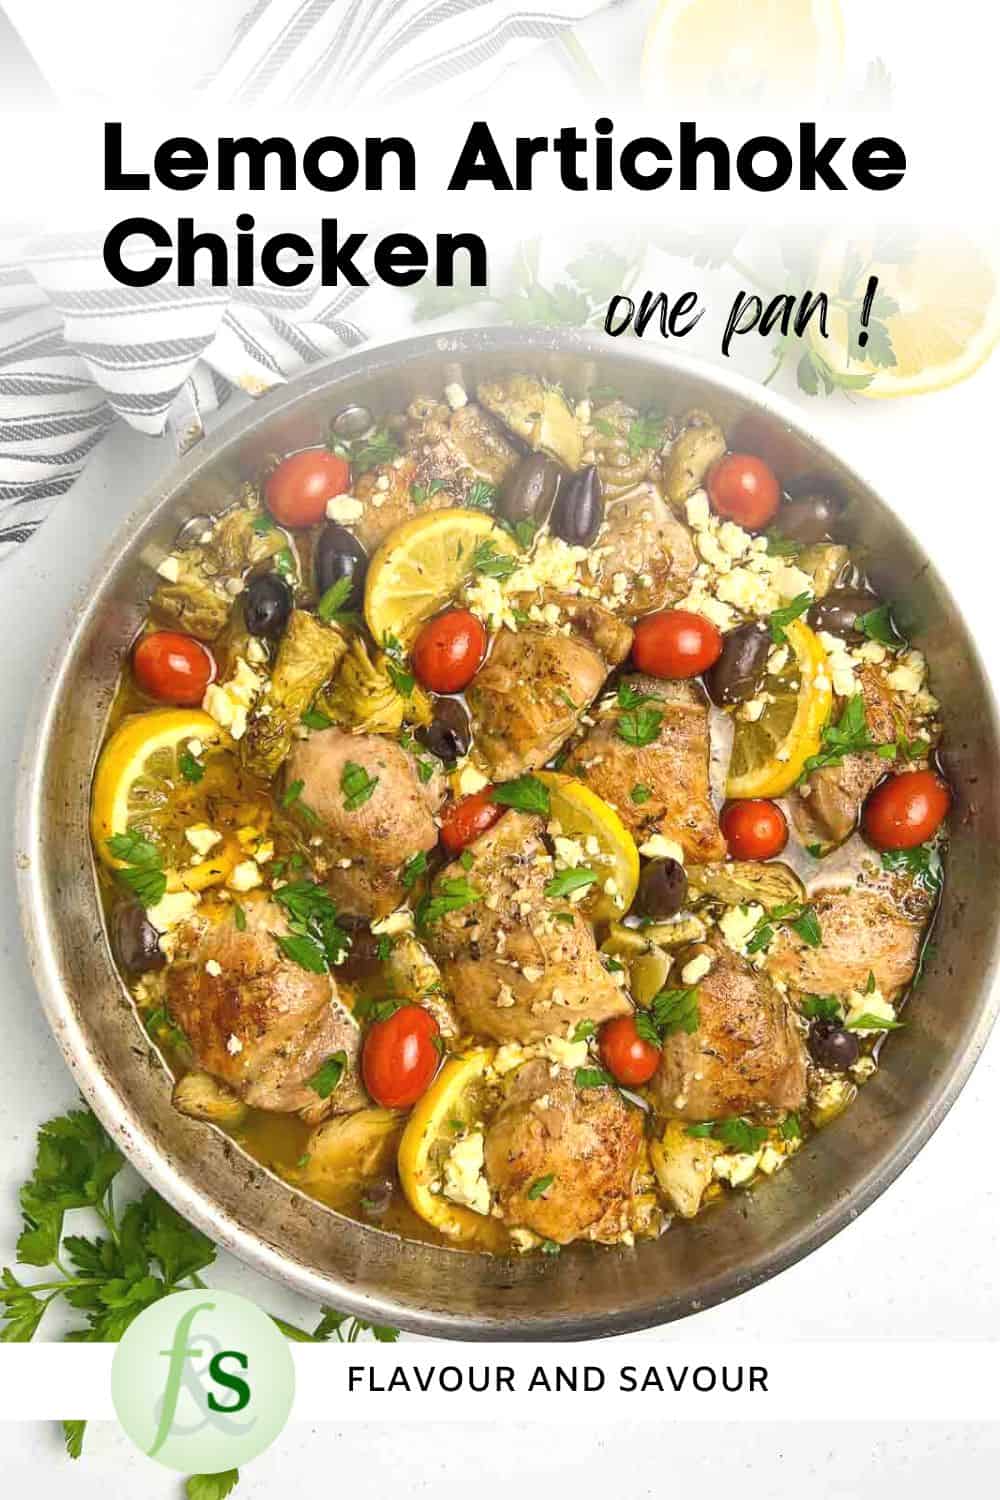 Image with text for Baked Lemon Artichoke Chicken.